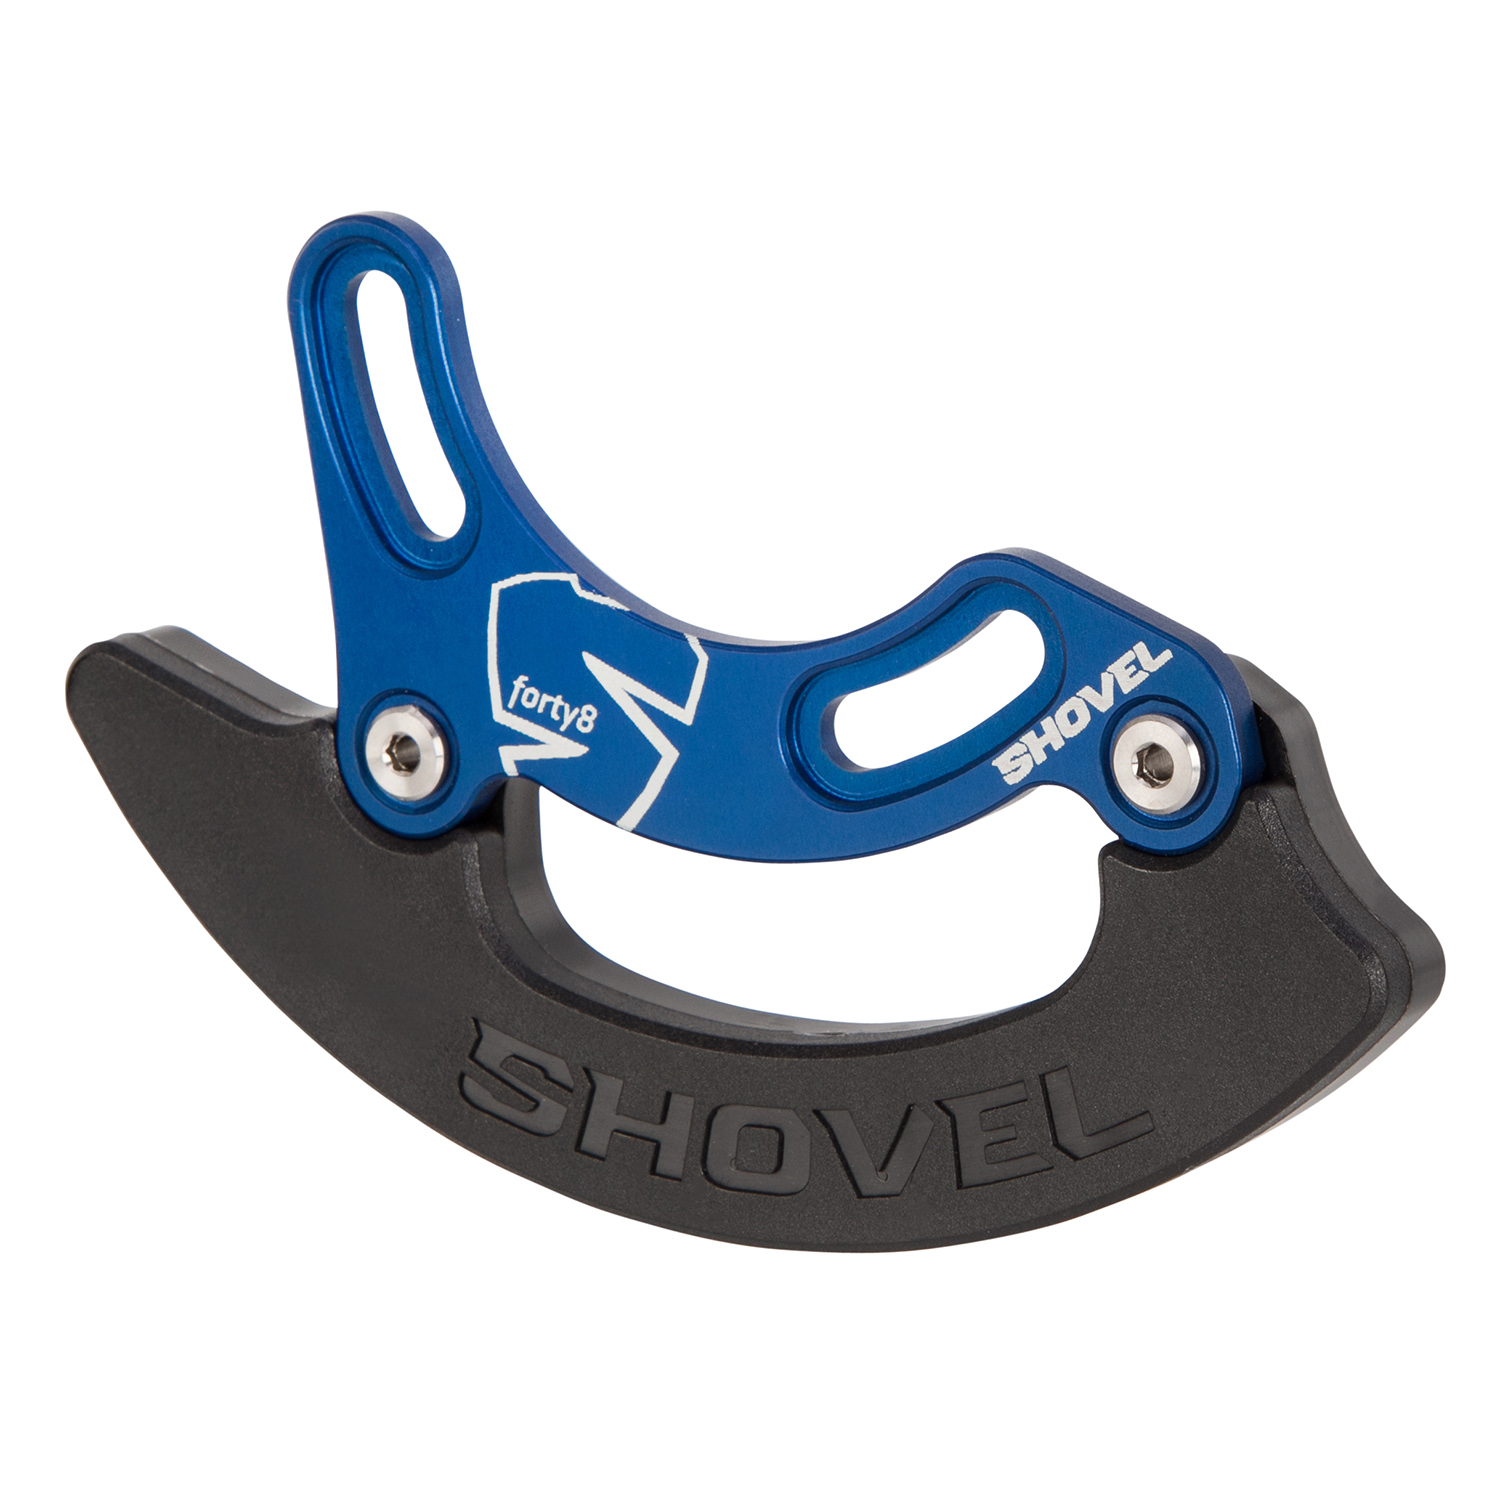 Shovel Chain Guide Forty8 Blue, 26-34 Teeth, ISCG05